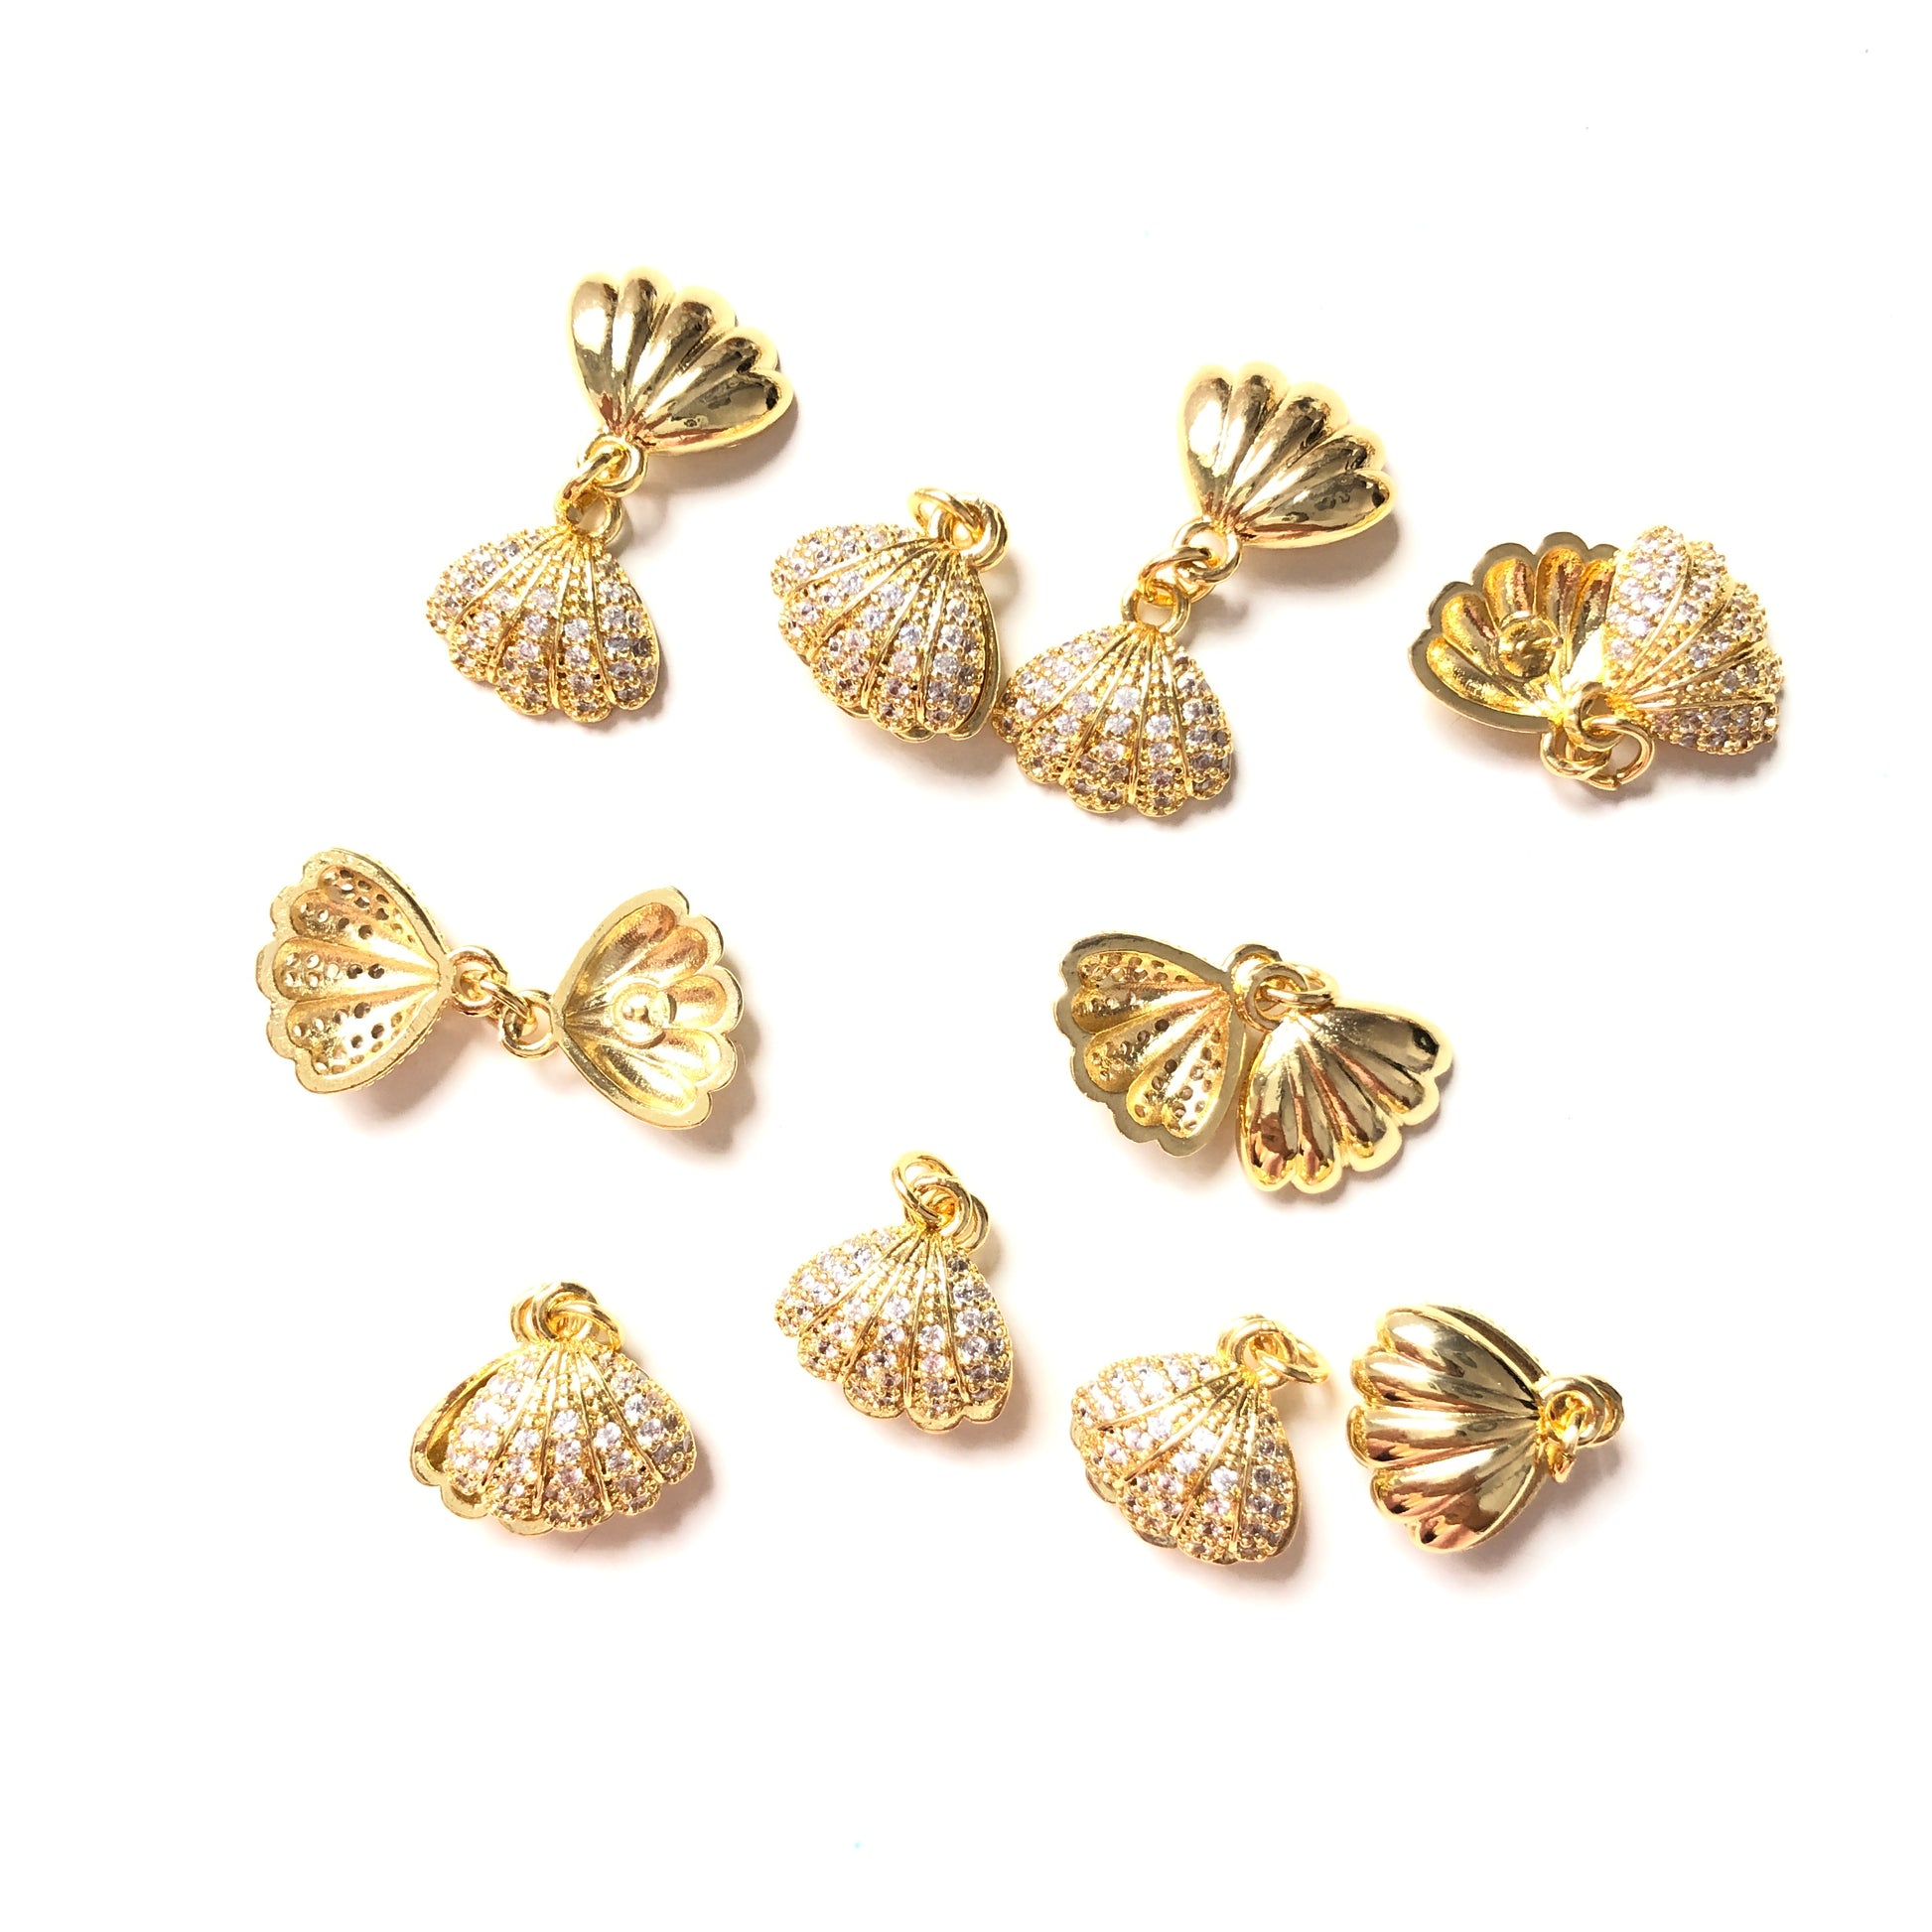 10pcs/lot 12.6*12.8mm CZ Paved Shell Charms CZ Paved Charms Small Sizes Charms Beads Beyond